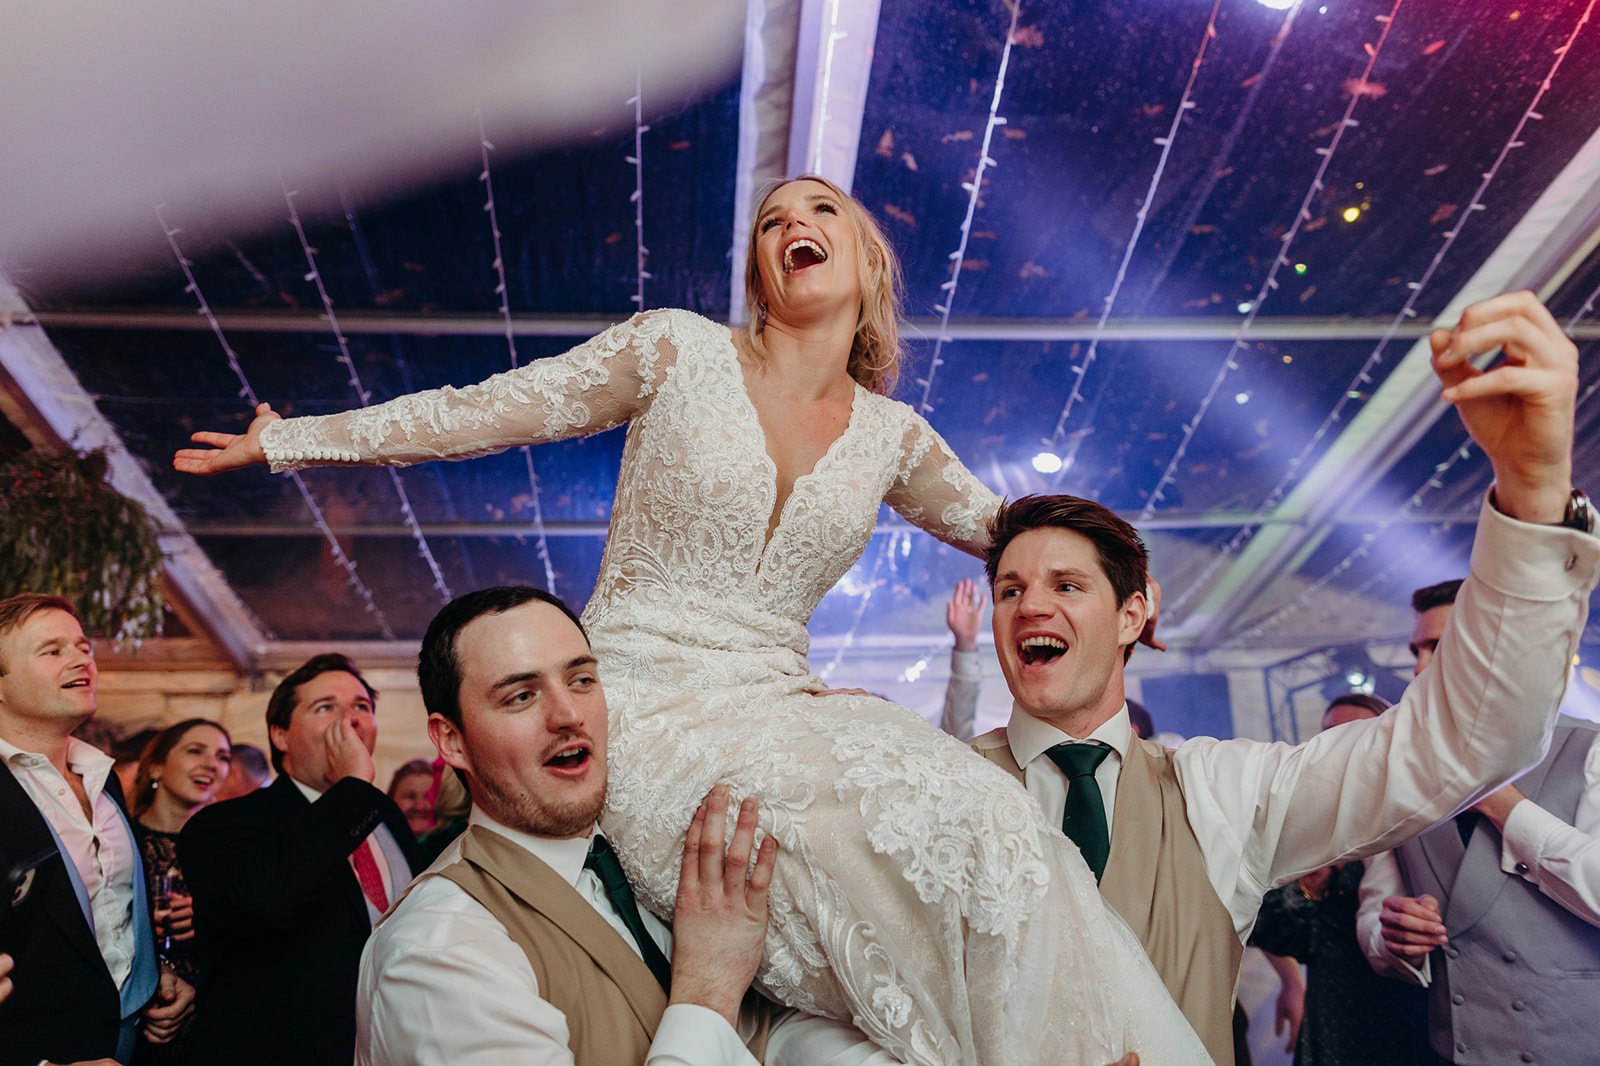 Lively celebration as bride is hoisted by groom and guest at a festive wedding reception beneath a string-lit tent.